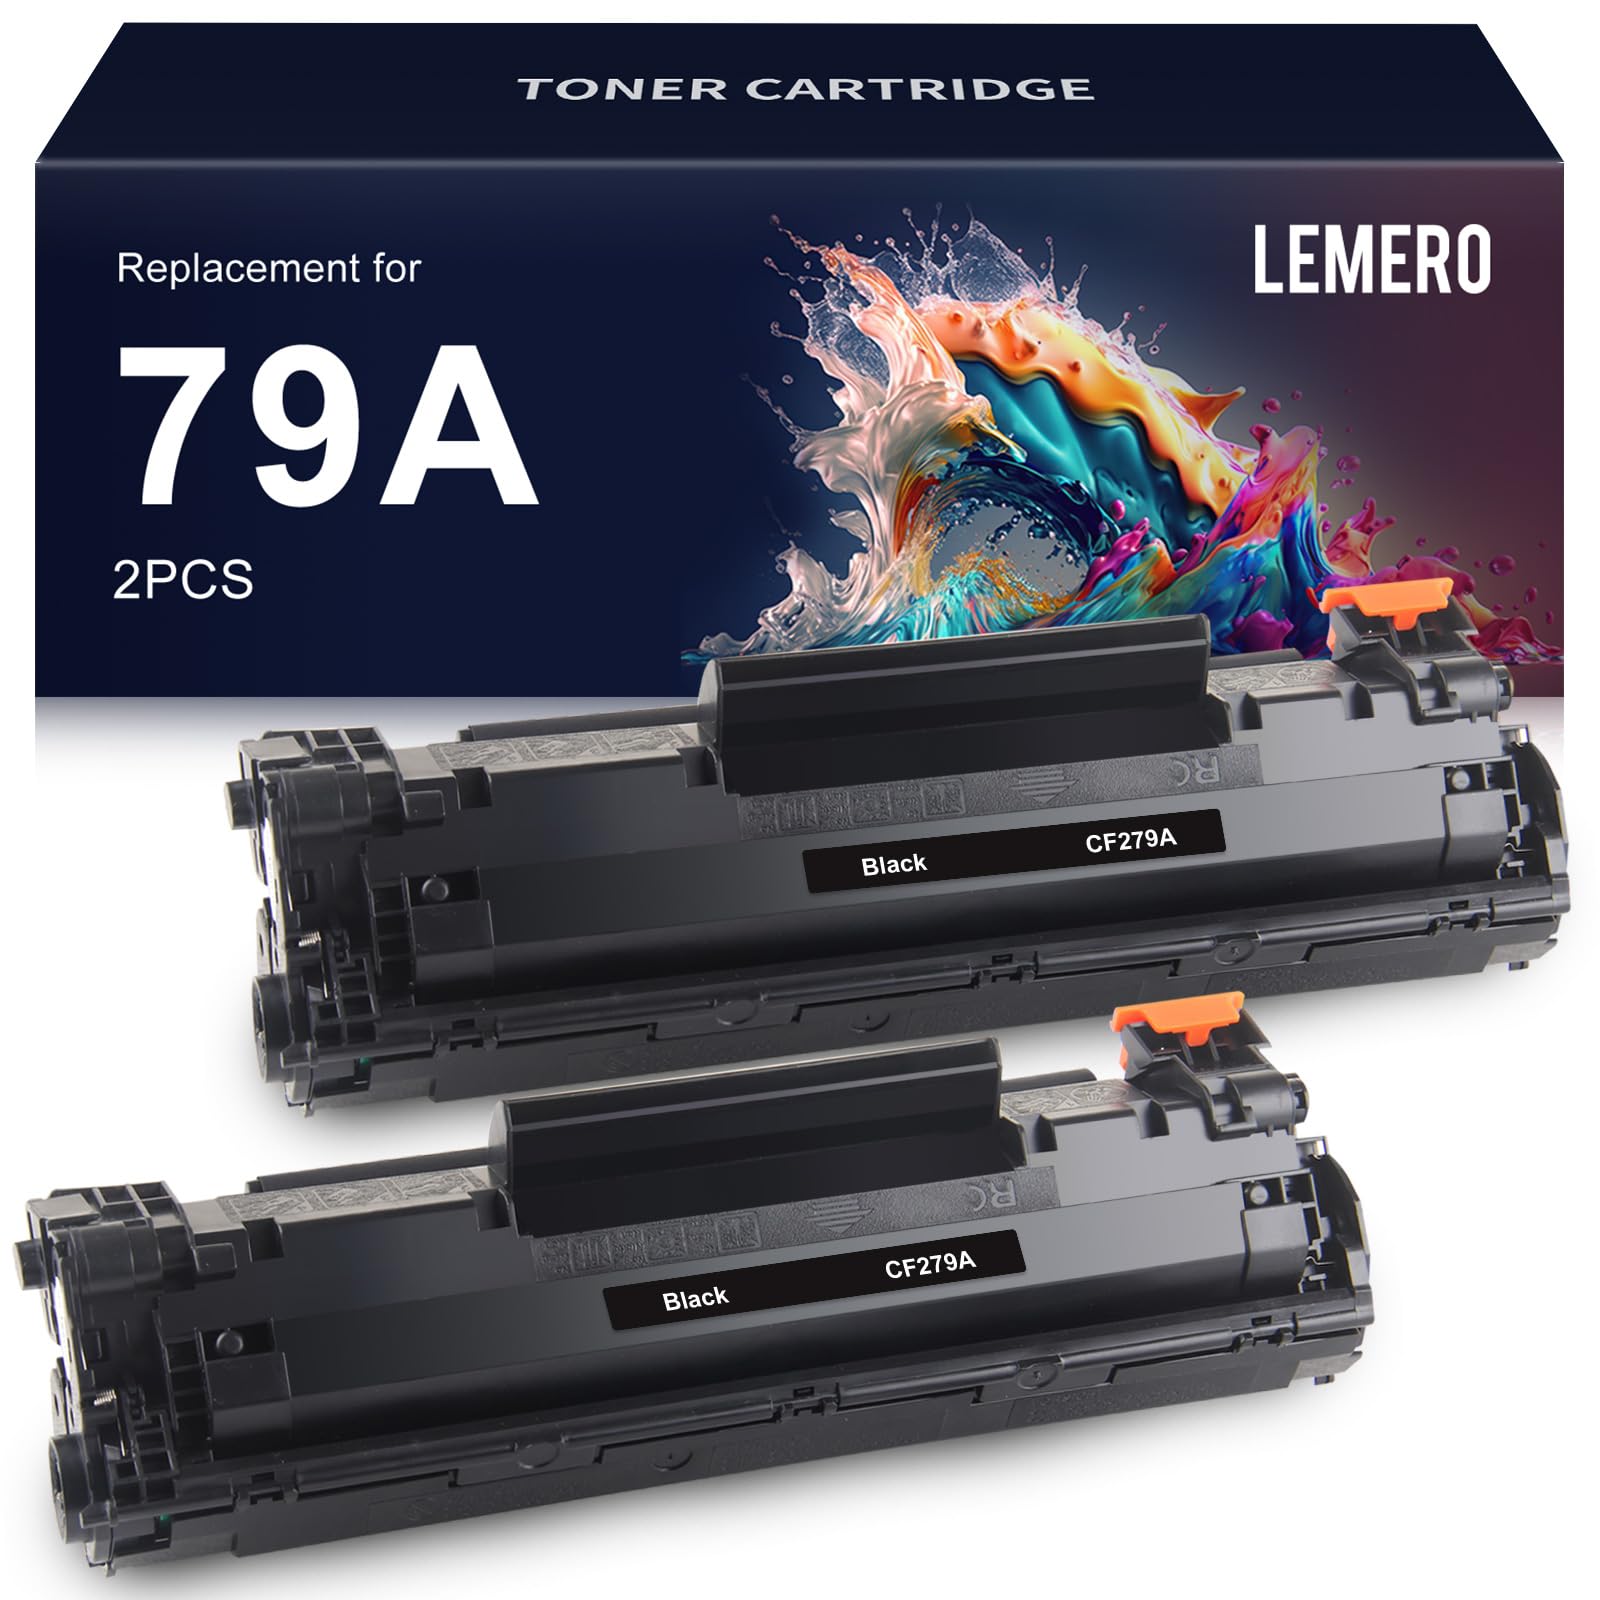 HP 79A Toner Cartridge Packaging Image: LEMERO HP 79A toner cartridge packaging showing two black toner cartridges with vibrant art, labeled for high print yield, perfect for professional use.